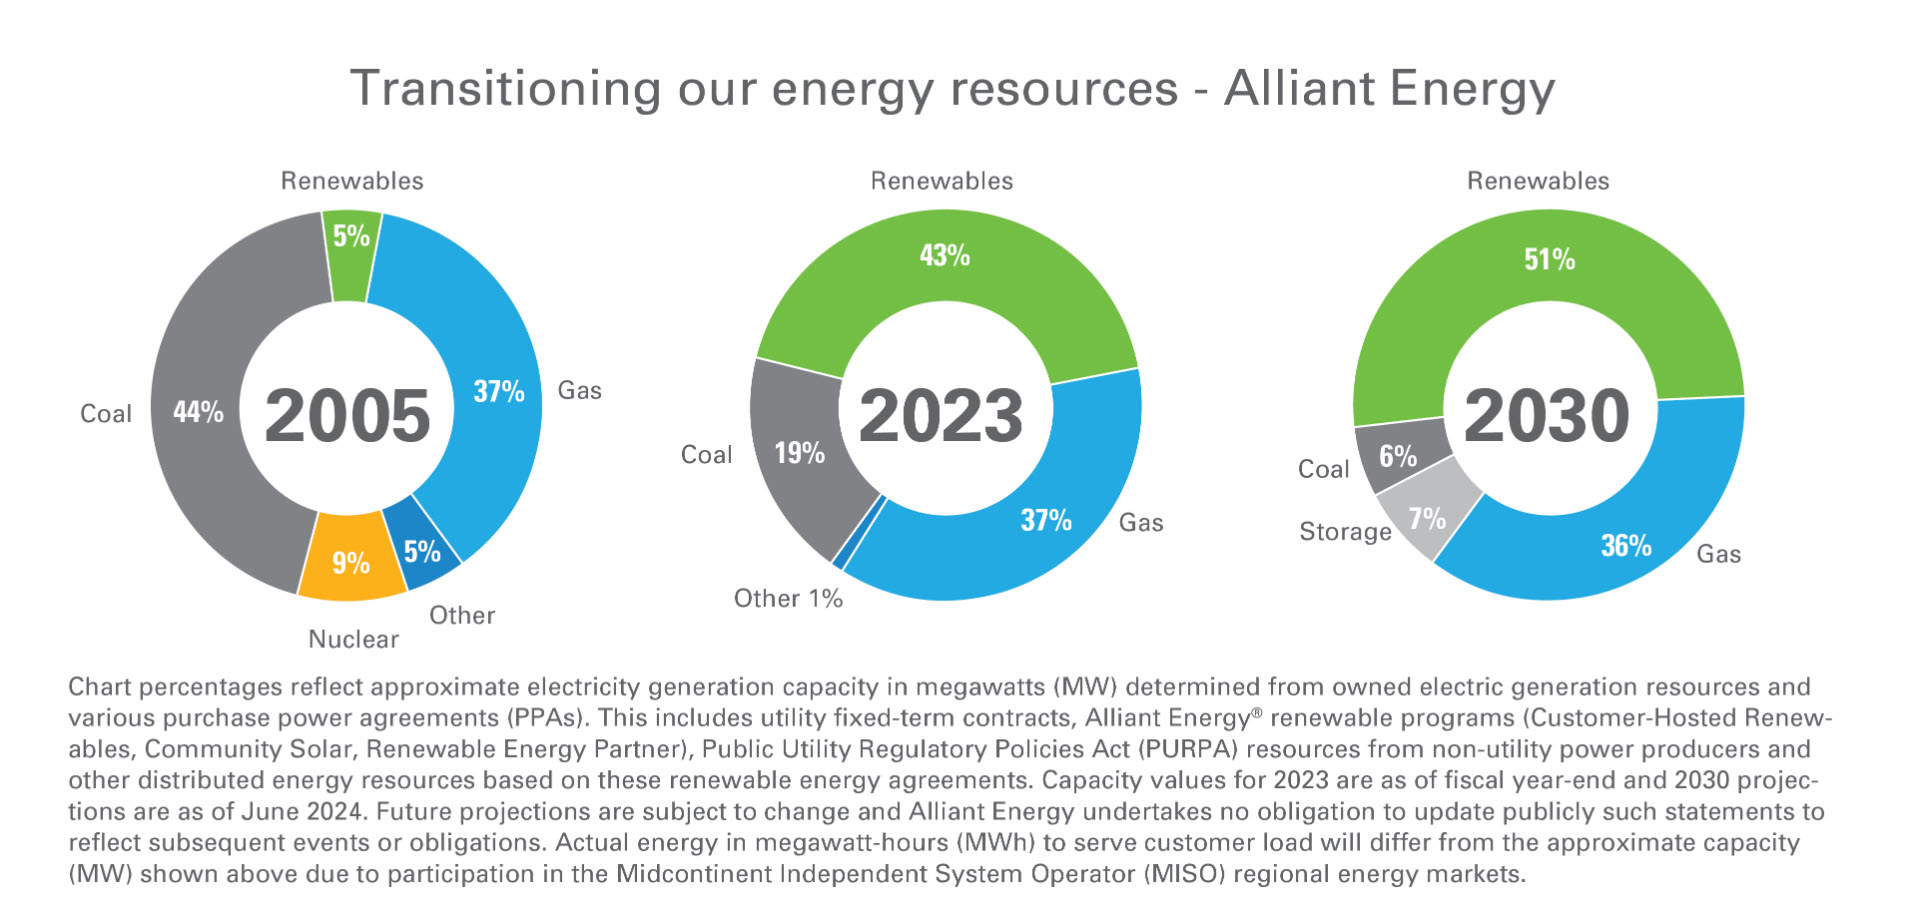 by 2030 our energy portfolio is expected to be 51% renewable, 36% gas, 7% energy storage, and 6% coal.